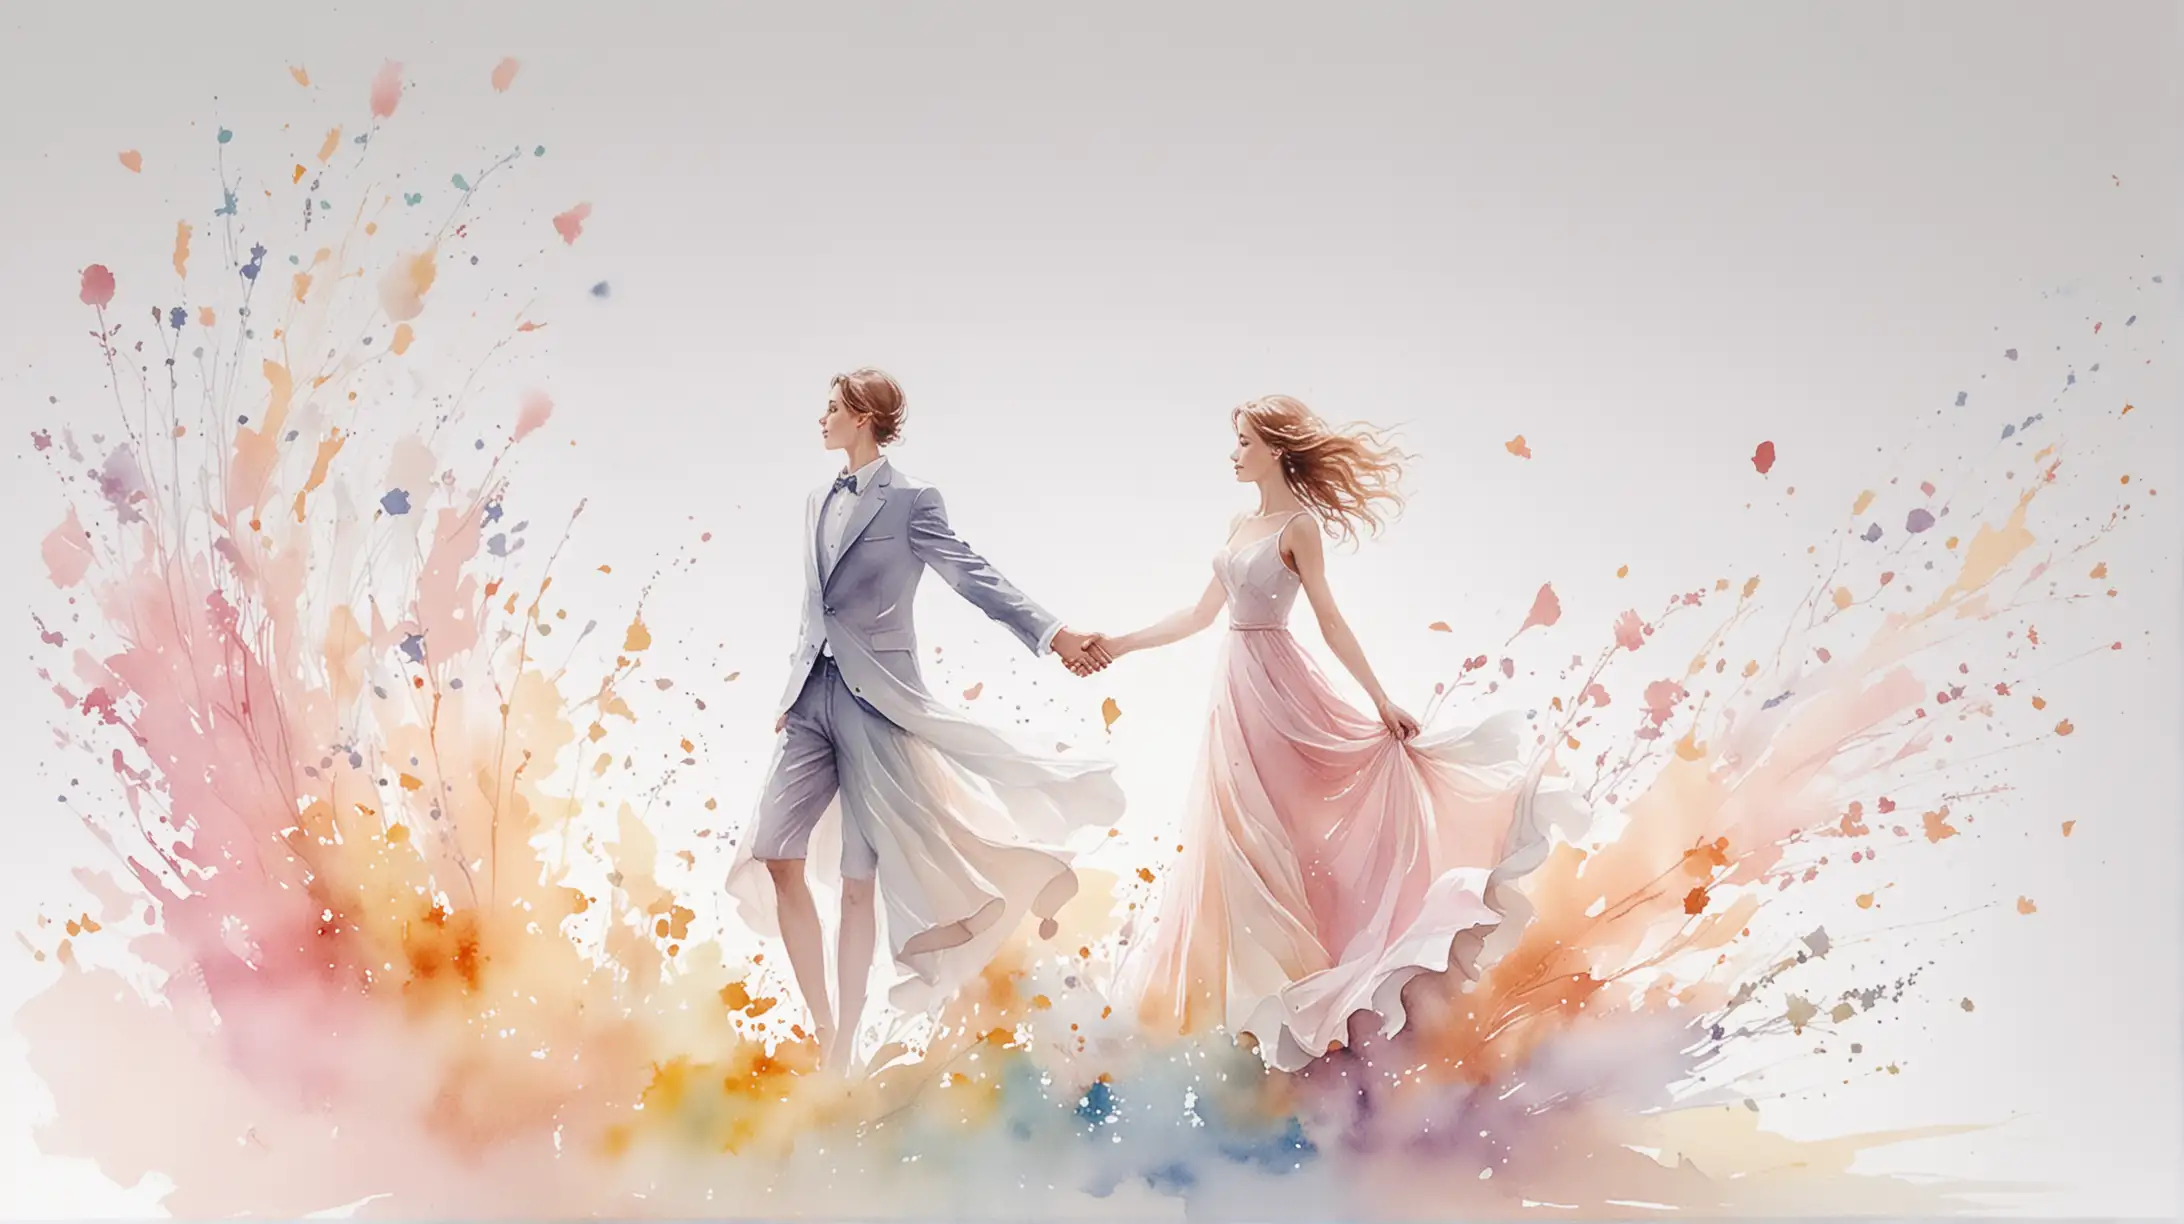 Whimsical Watercolor Divorces Dancing in Pastel Shades of Spring